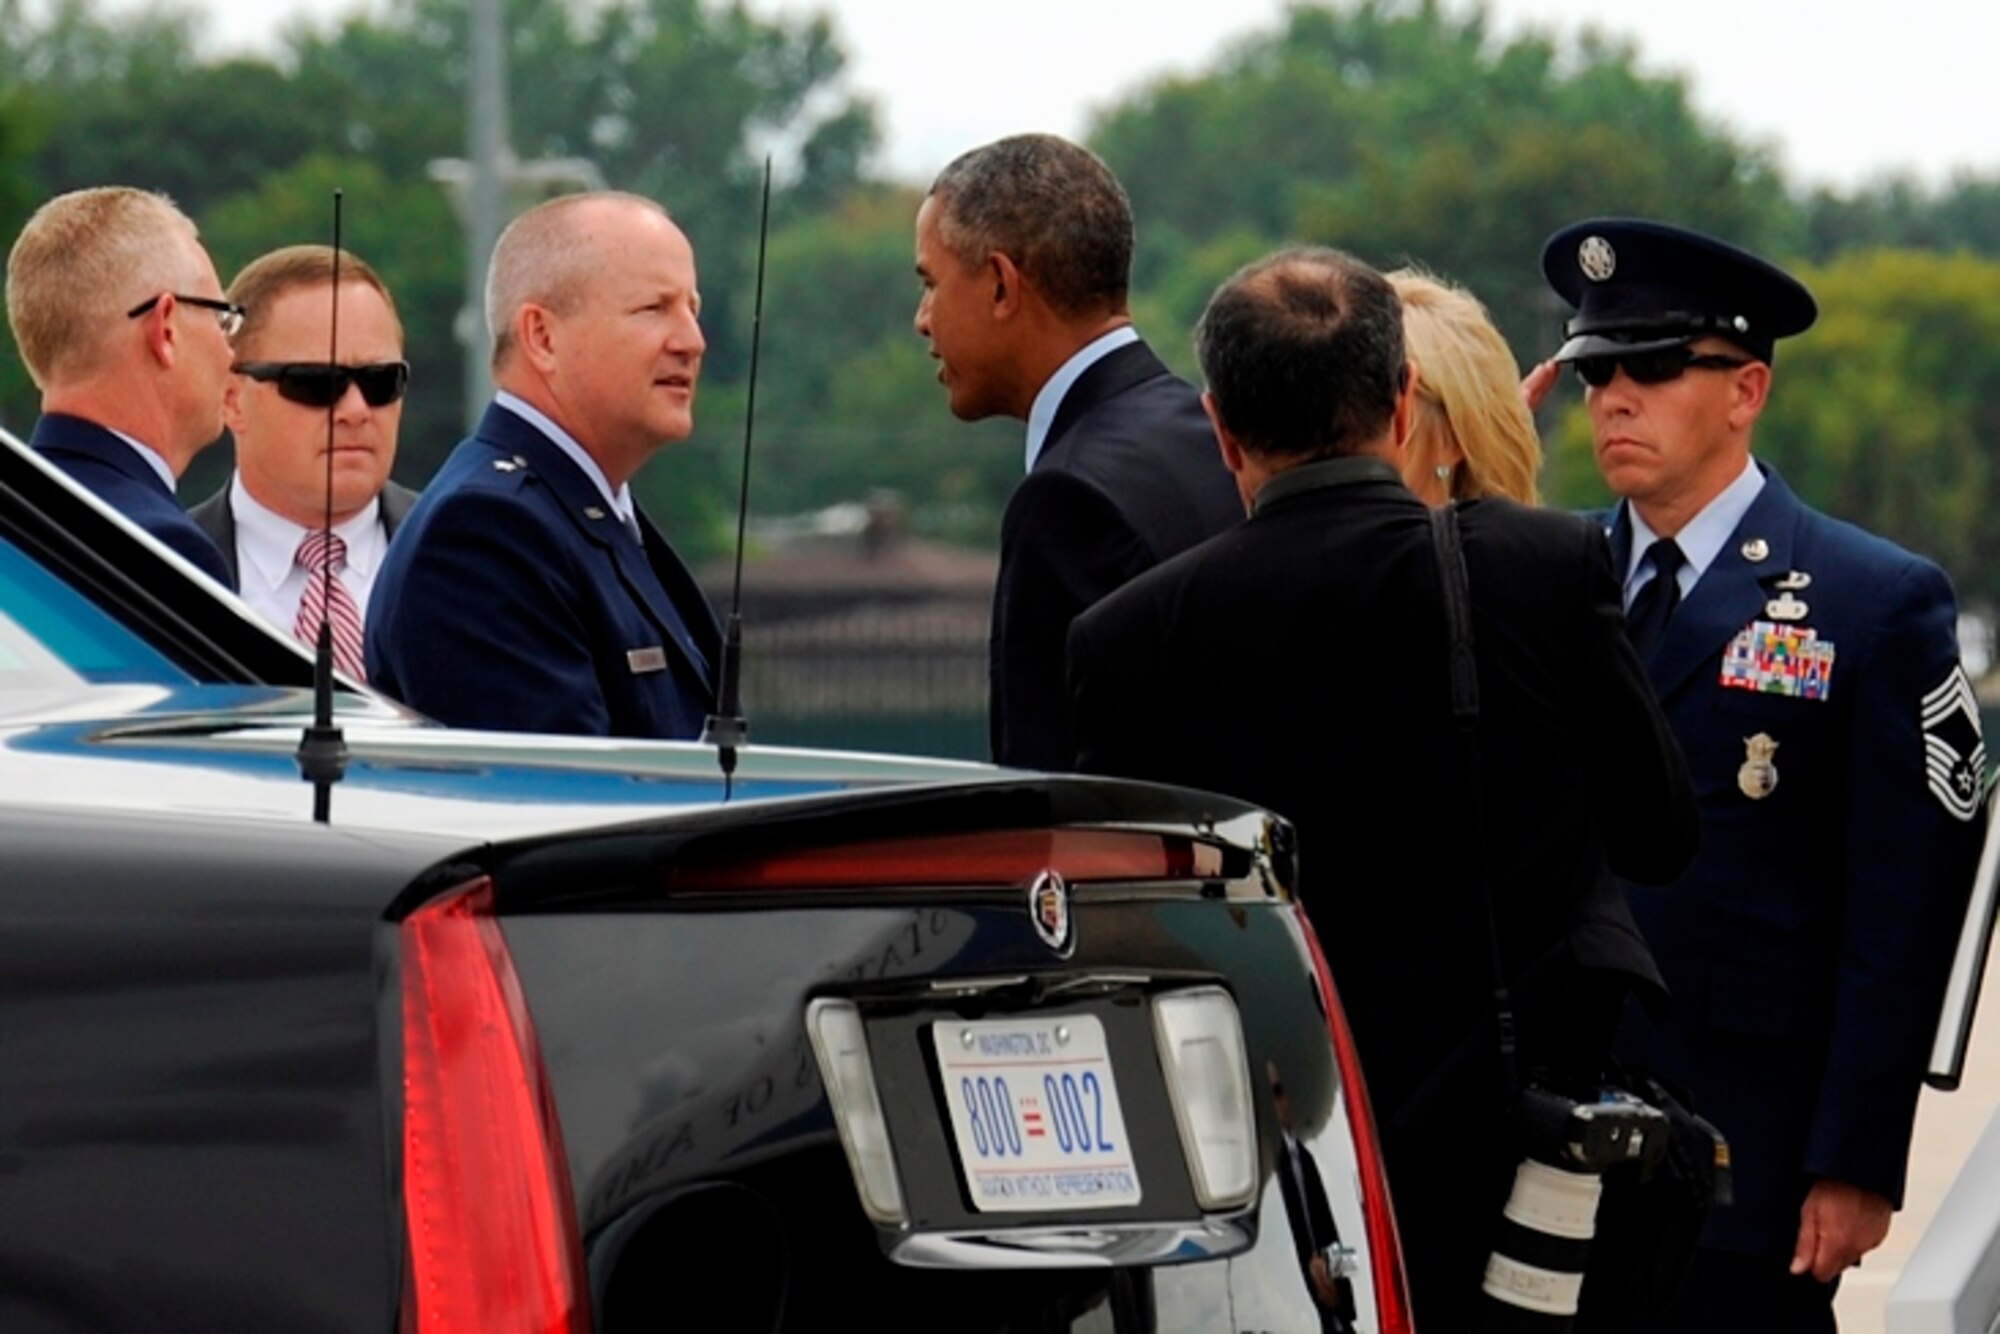 President Barack Obama is greeted by Brig. Gen. Doug Slocum, commander of the 127th Wing, upon the president’s arrival at Selfridge Air National Guard Base, Mich., Sept. 9, 2015. The president spoke briefly with the general and visited with a small group of Airmen and local guests at the base before traveling to nearby Macomb Community College in Warren, Mich., to discuss federal higher education initiatives. (U.S. Air National Guard photo by Tech. Sgt. Dan Heaton / Released)